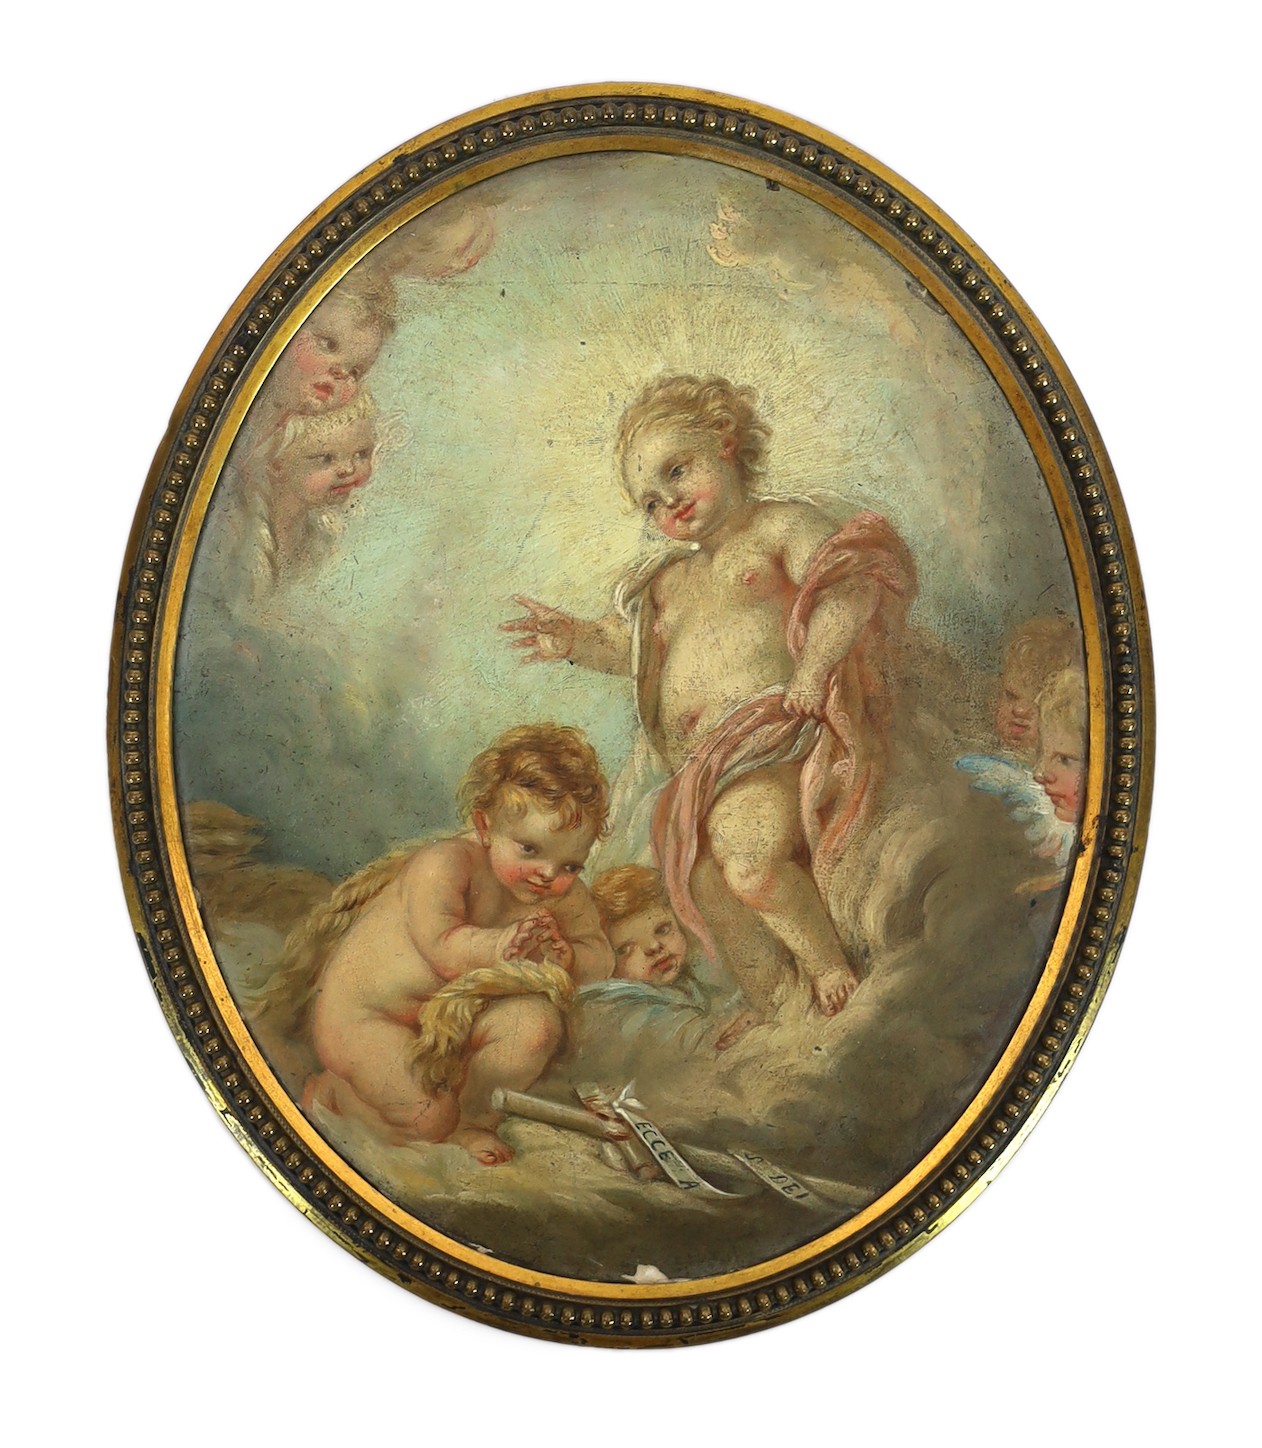 After Francois Boucher (French, 1703-1770), Celestial scene - The infant Jesus blessing St. John the Baptist, with a banner - ‘’Ecce Angus Dei’’ [Behold the Lamb of God], oil on canvas laid down, 21 x 17cm, framed to the